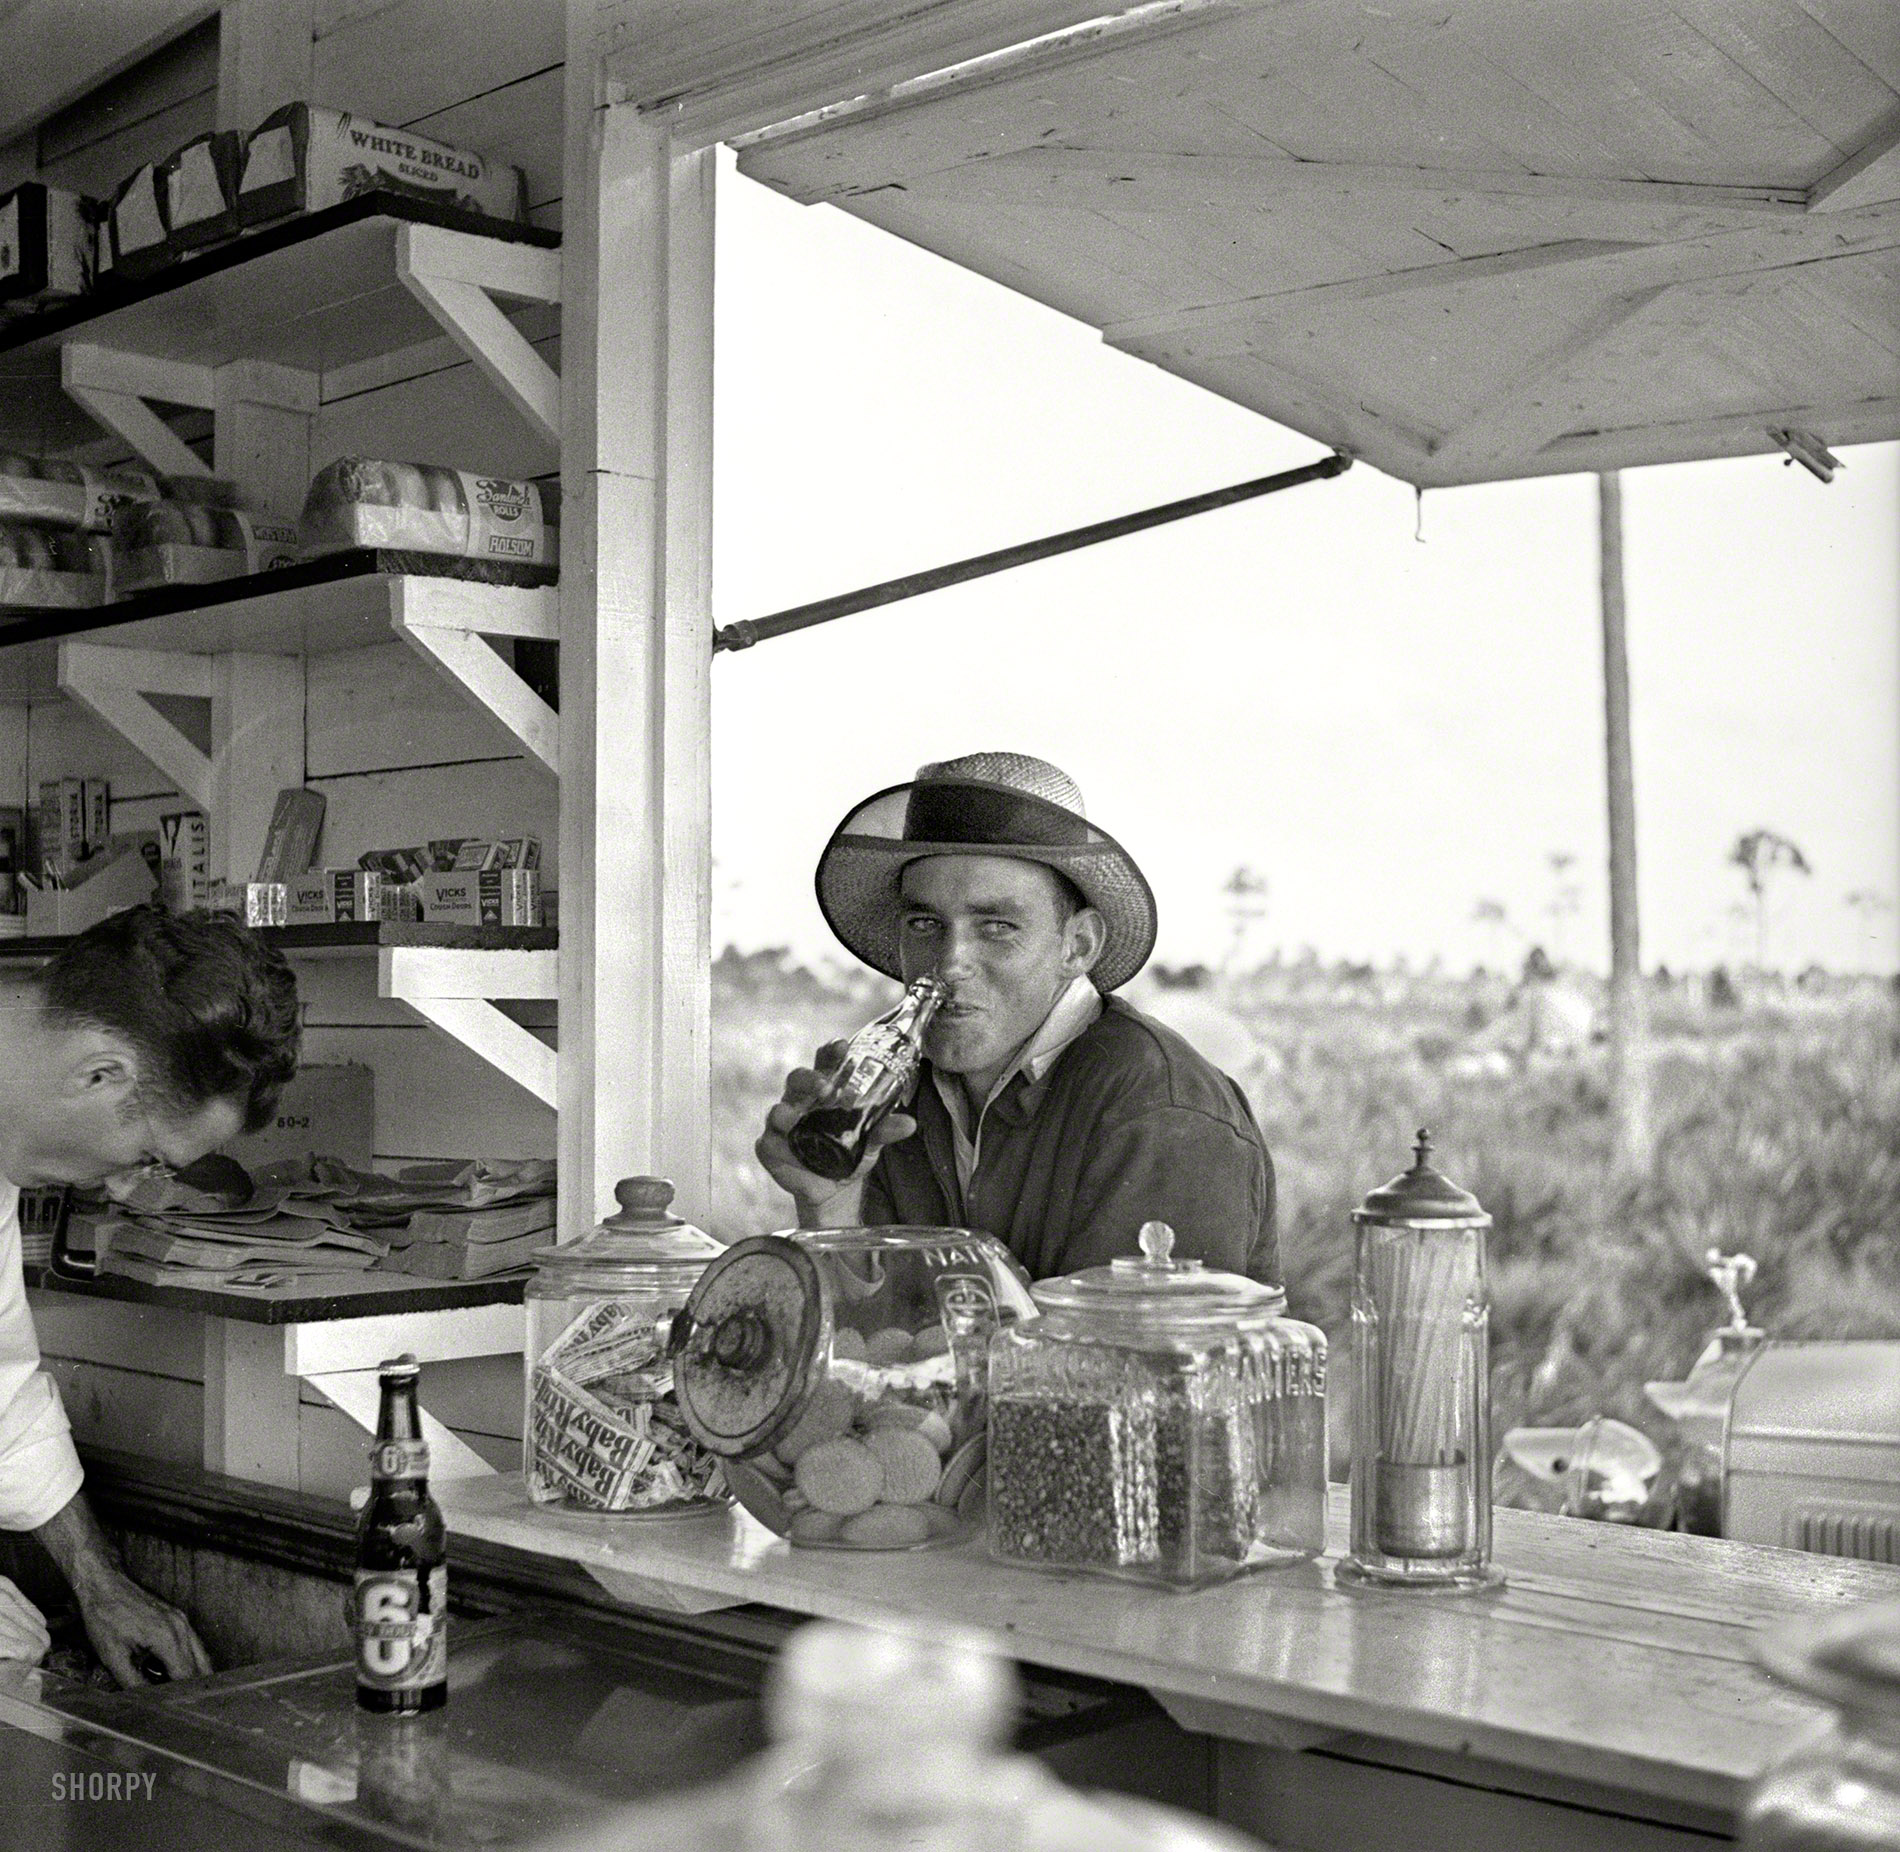 January 1937. "Unmarried man who works in the packinghouse at Deerfield, Fla." Photo by Arthur Rothstein, Resettlement Administration. View full size.